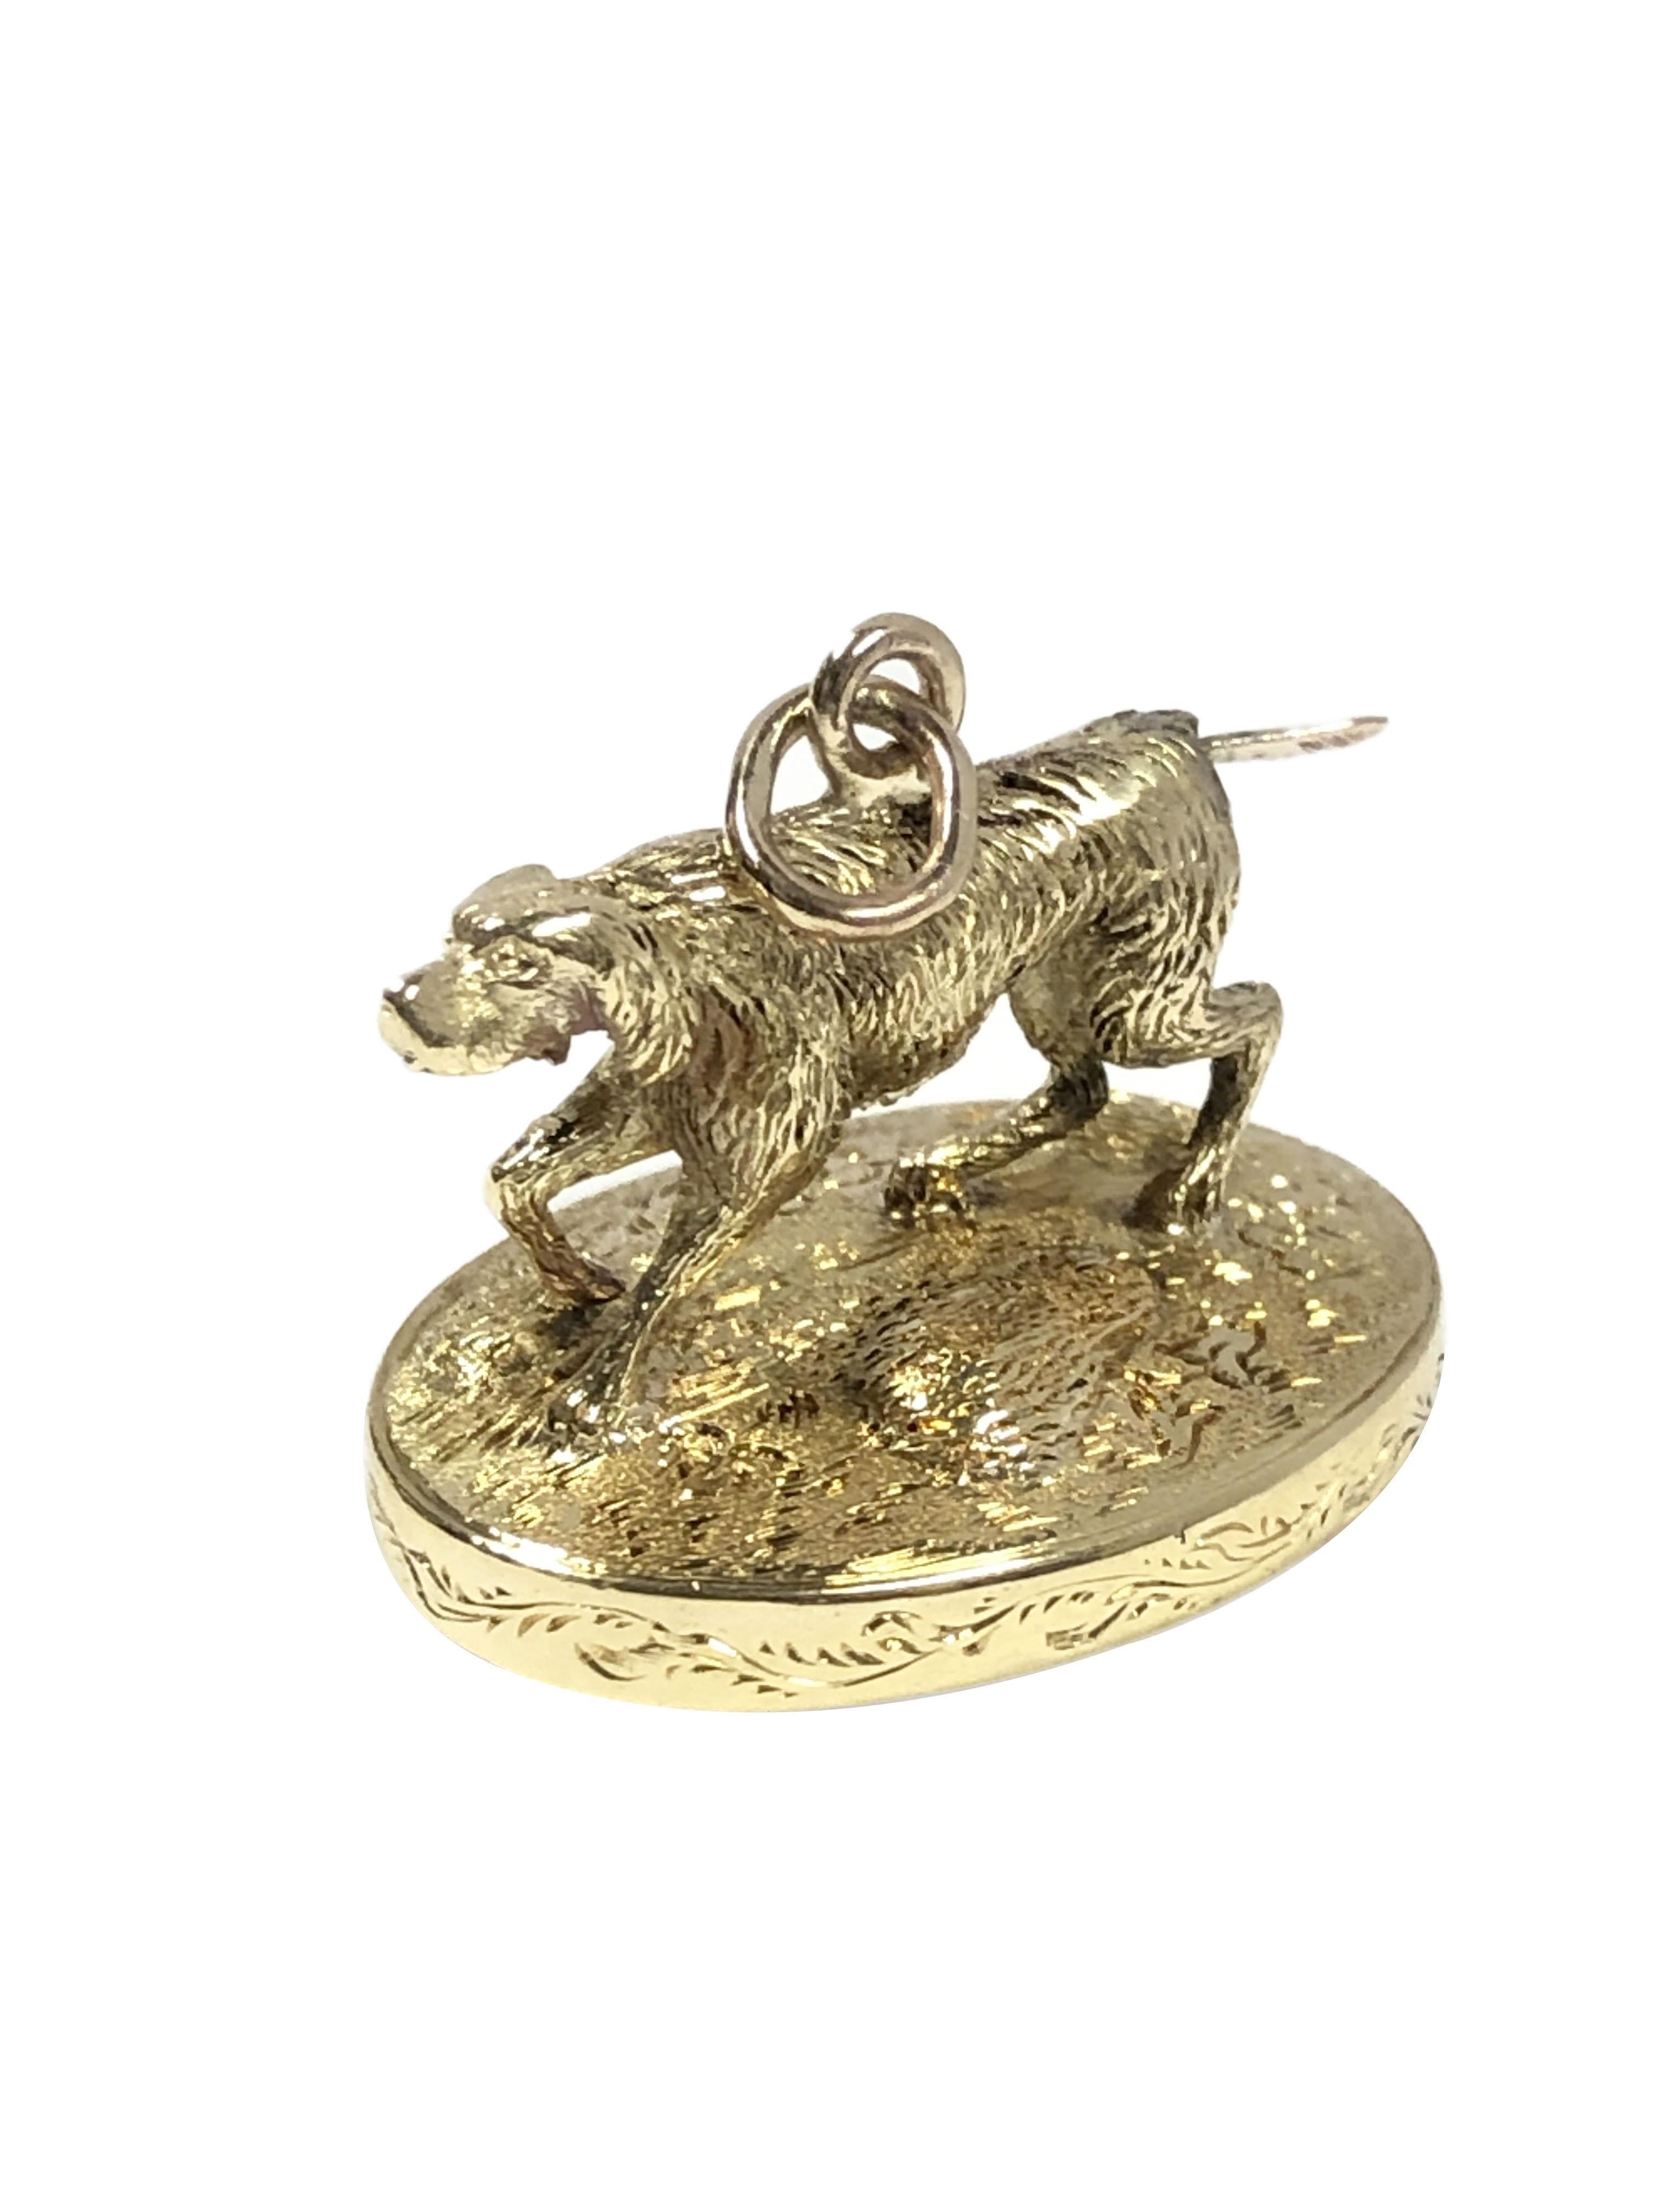 Circa 1890 Solid Gold Figural  Hunting theme Seal Fob, measuring 1 inch X 3/4 inch x 1 inch height. extremely well detailed hand chased Gold work, set with a Blood Stone having deep intaglio carving with a Hunting Dog, initials and the phrase 